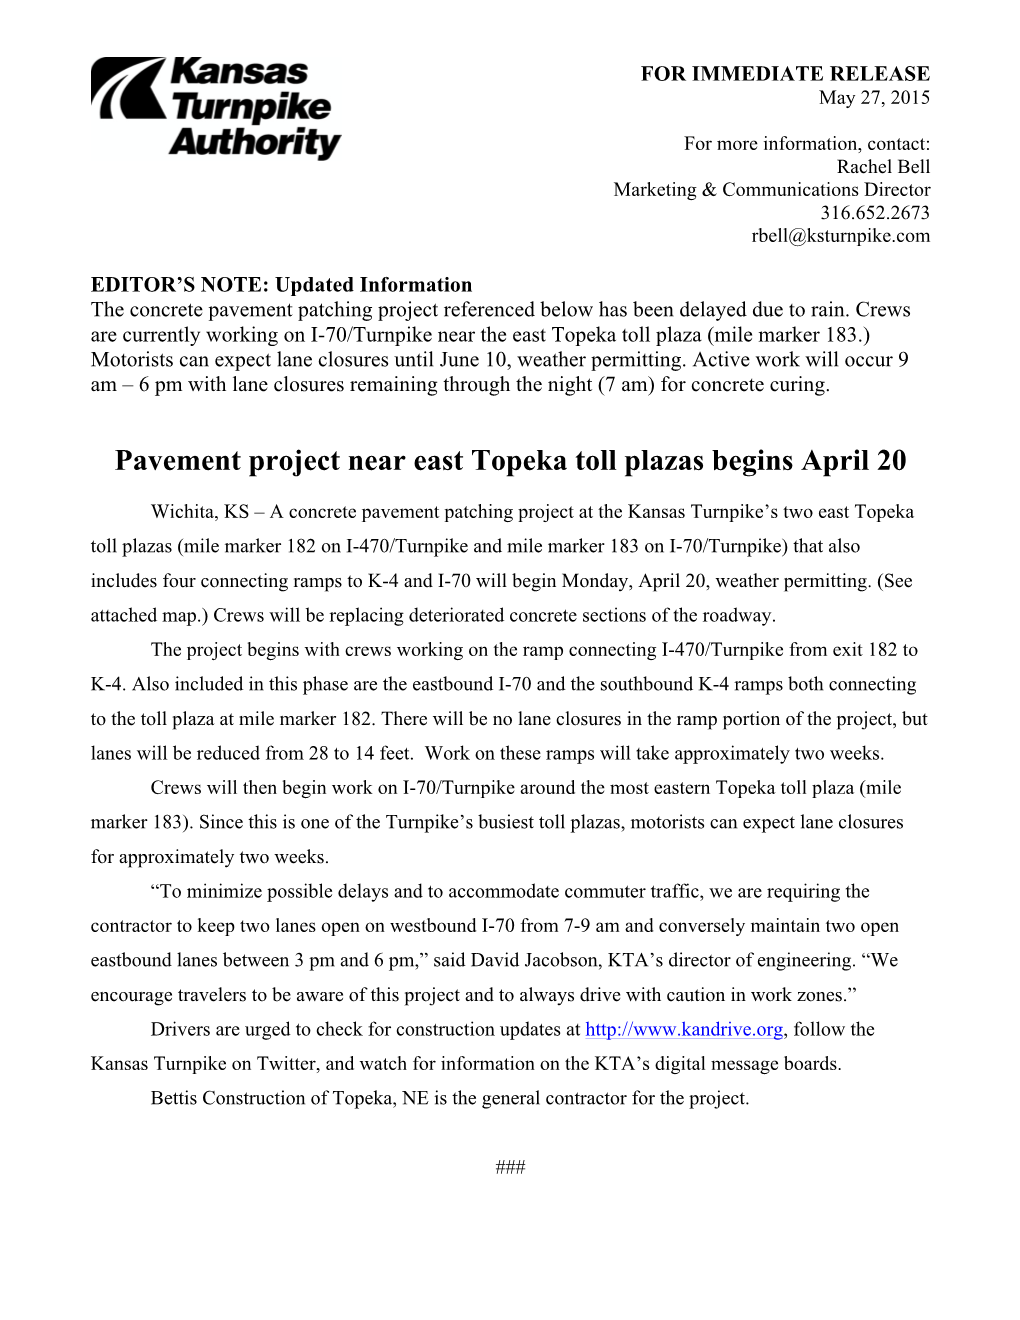 Pavement Project Near East Topeka Toll Plazas Begins April 20